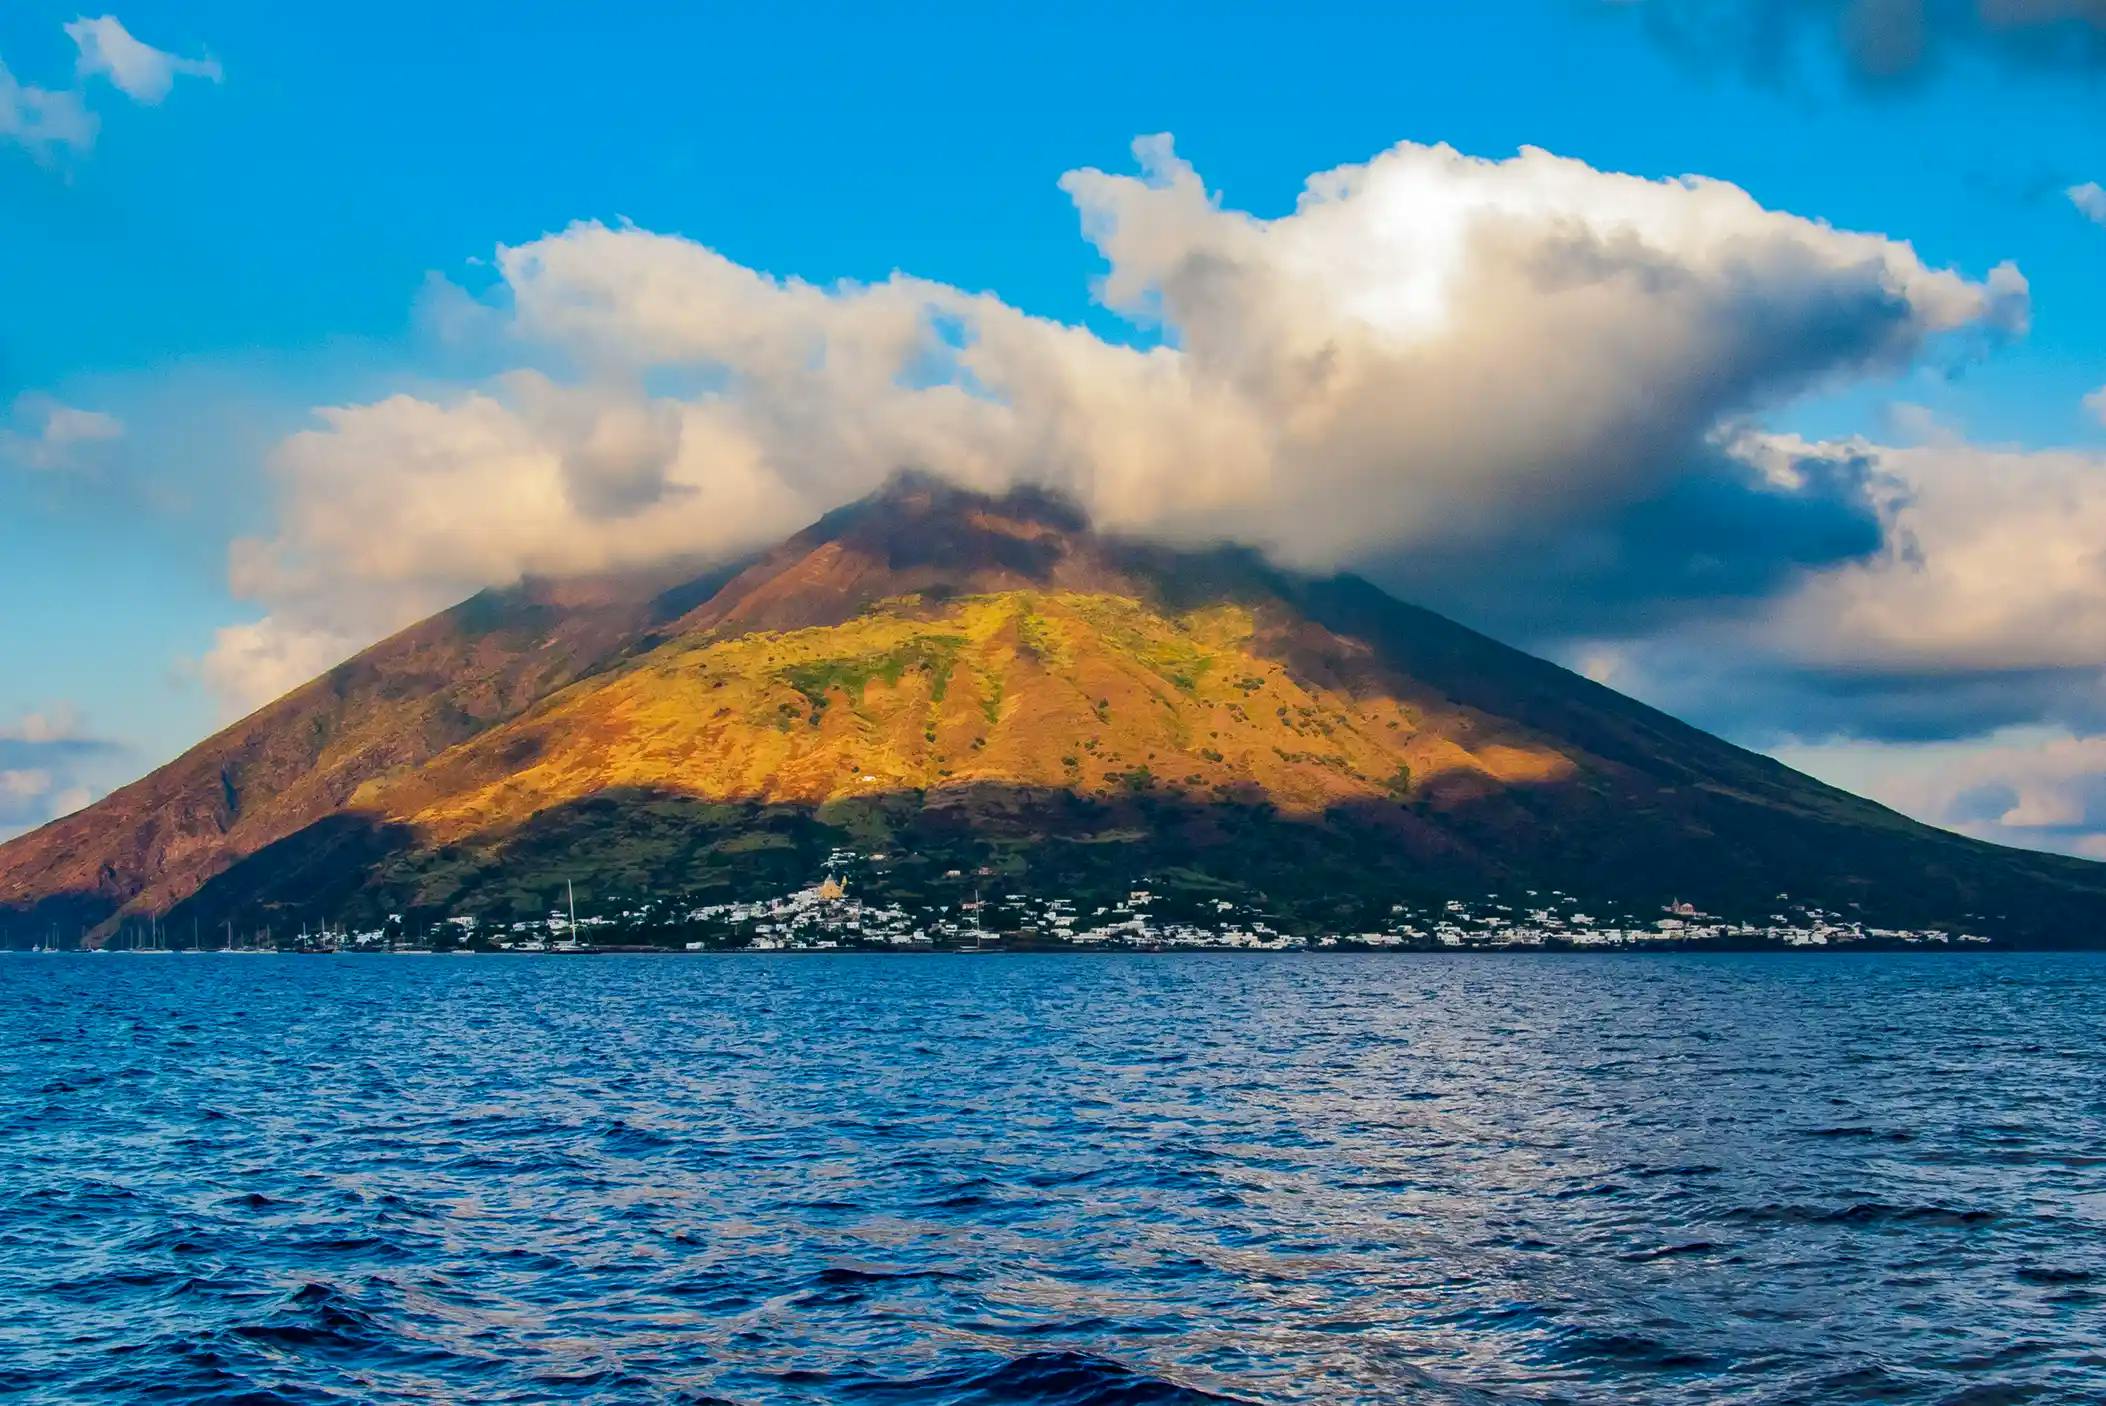 Mountain view of Passing Isola di Stromboli, Italy